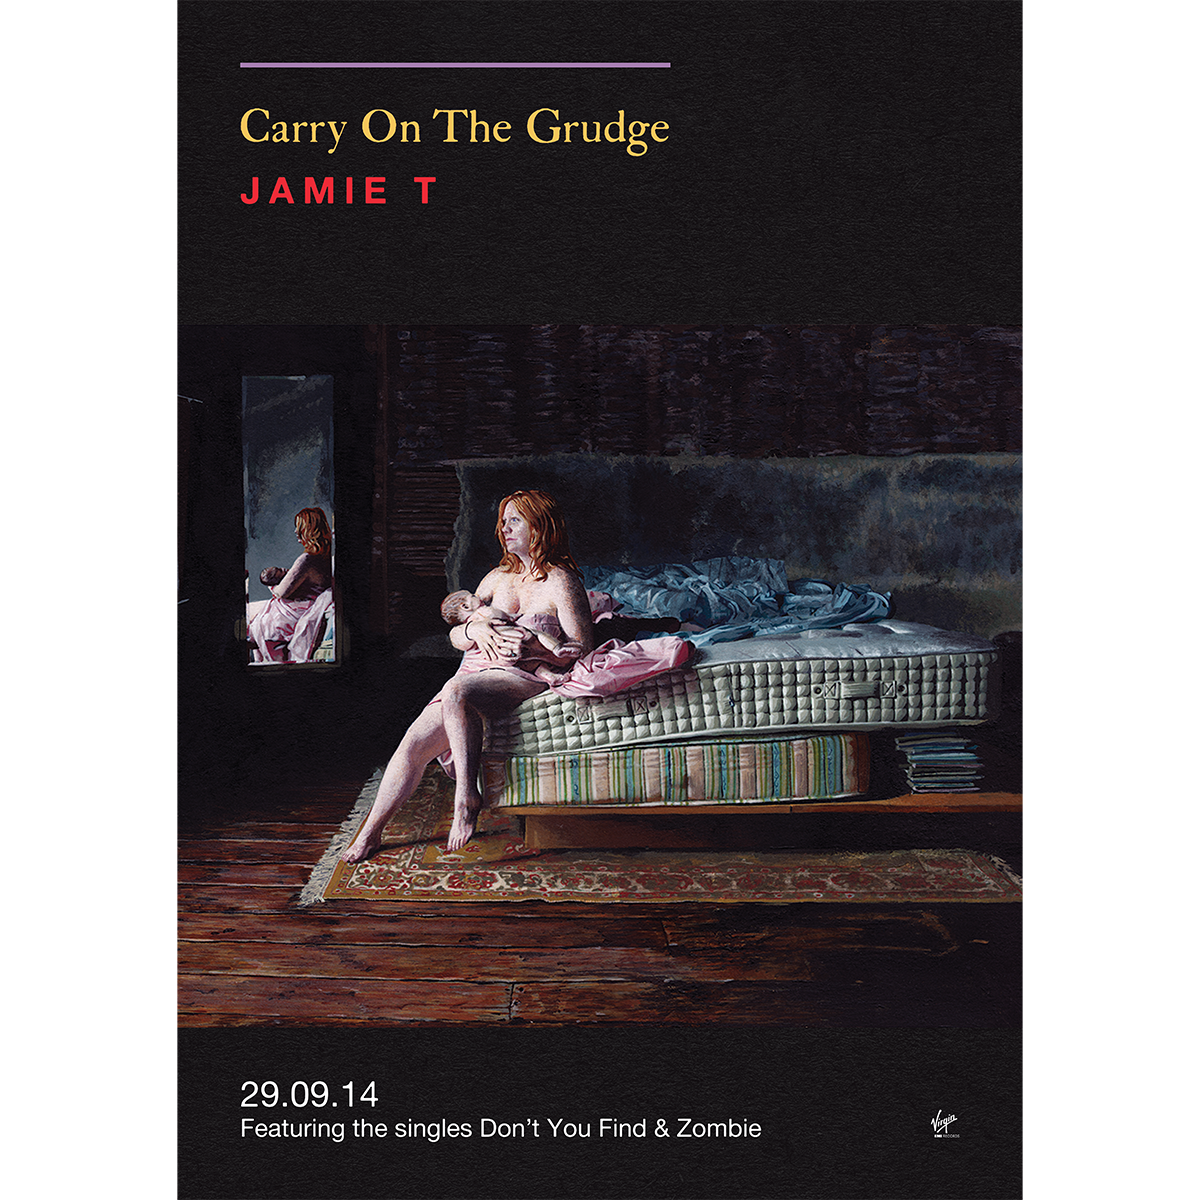 Jamie T - Carry On The Grudge: Signed Poster